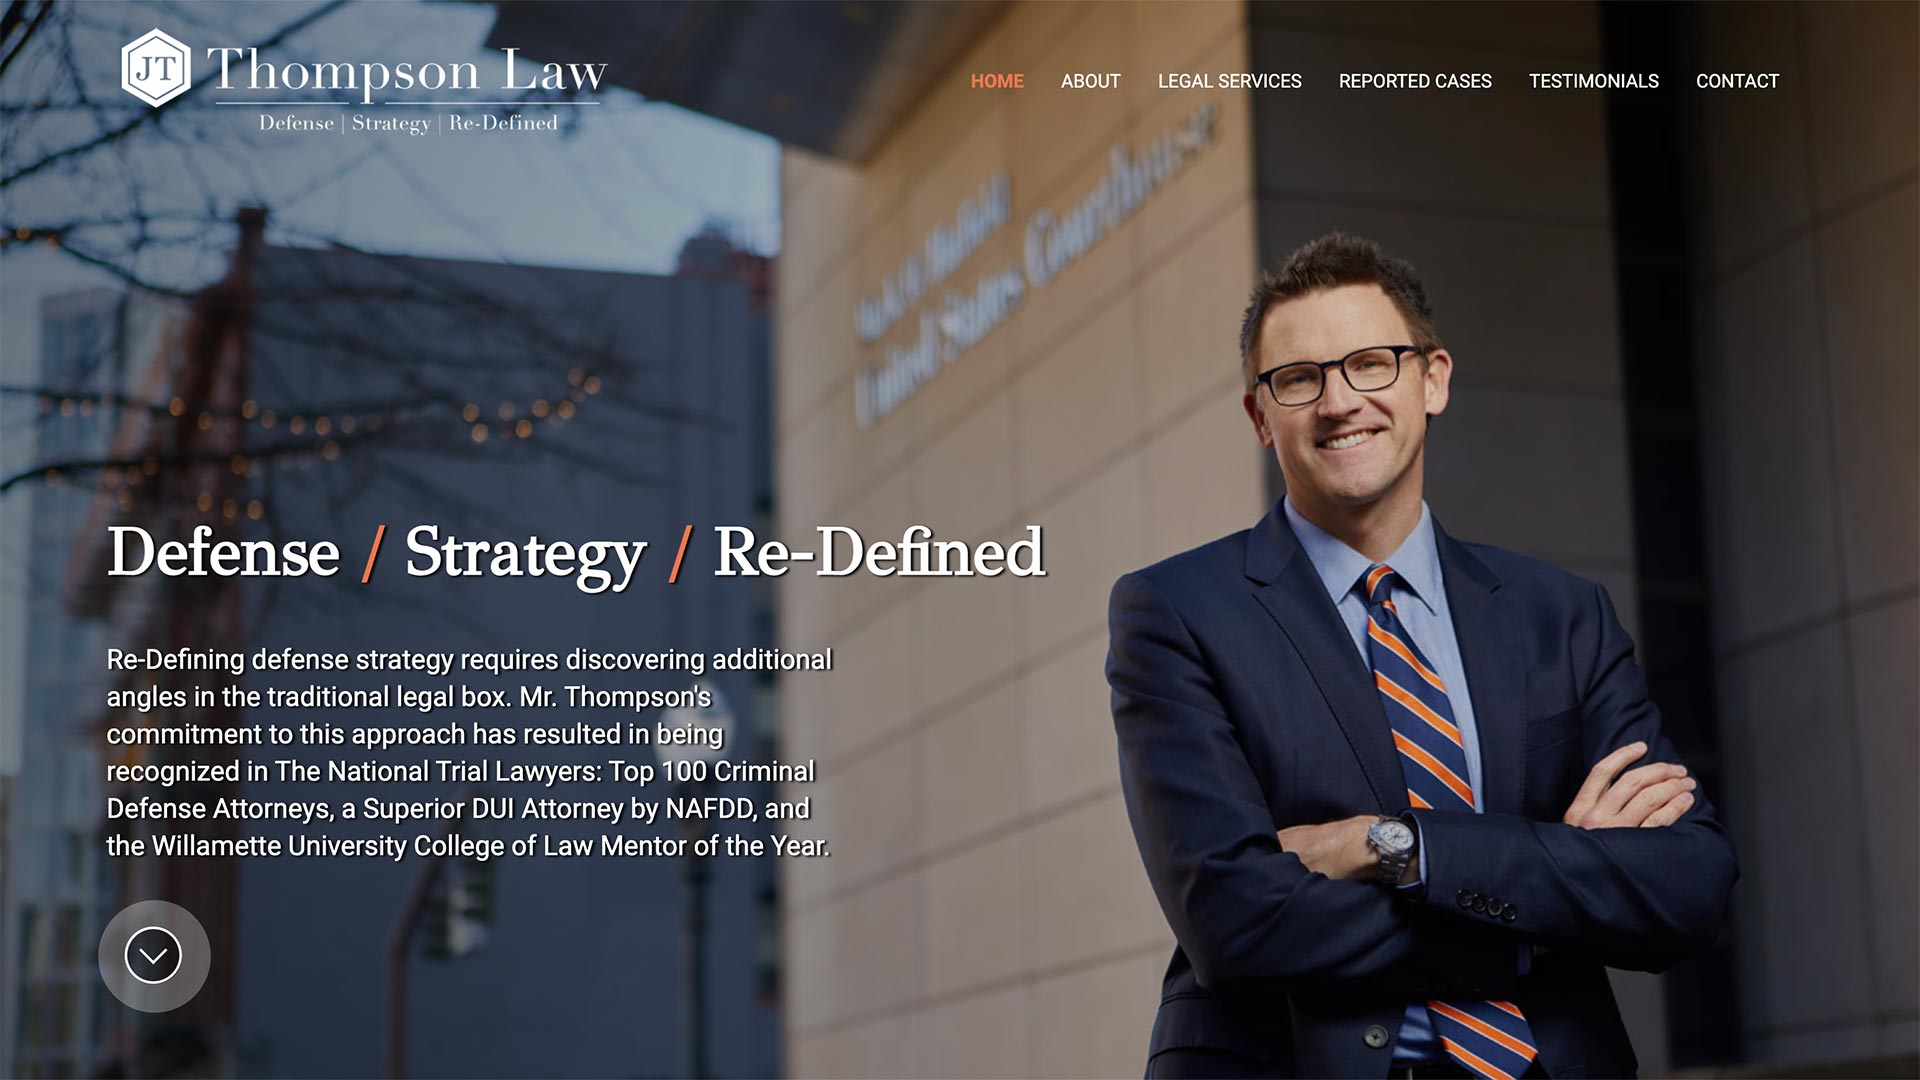 Small Law Firm Website Design: Thompson Law